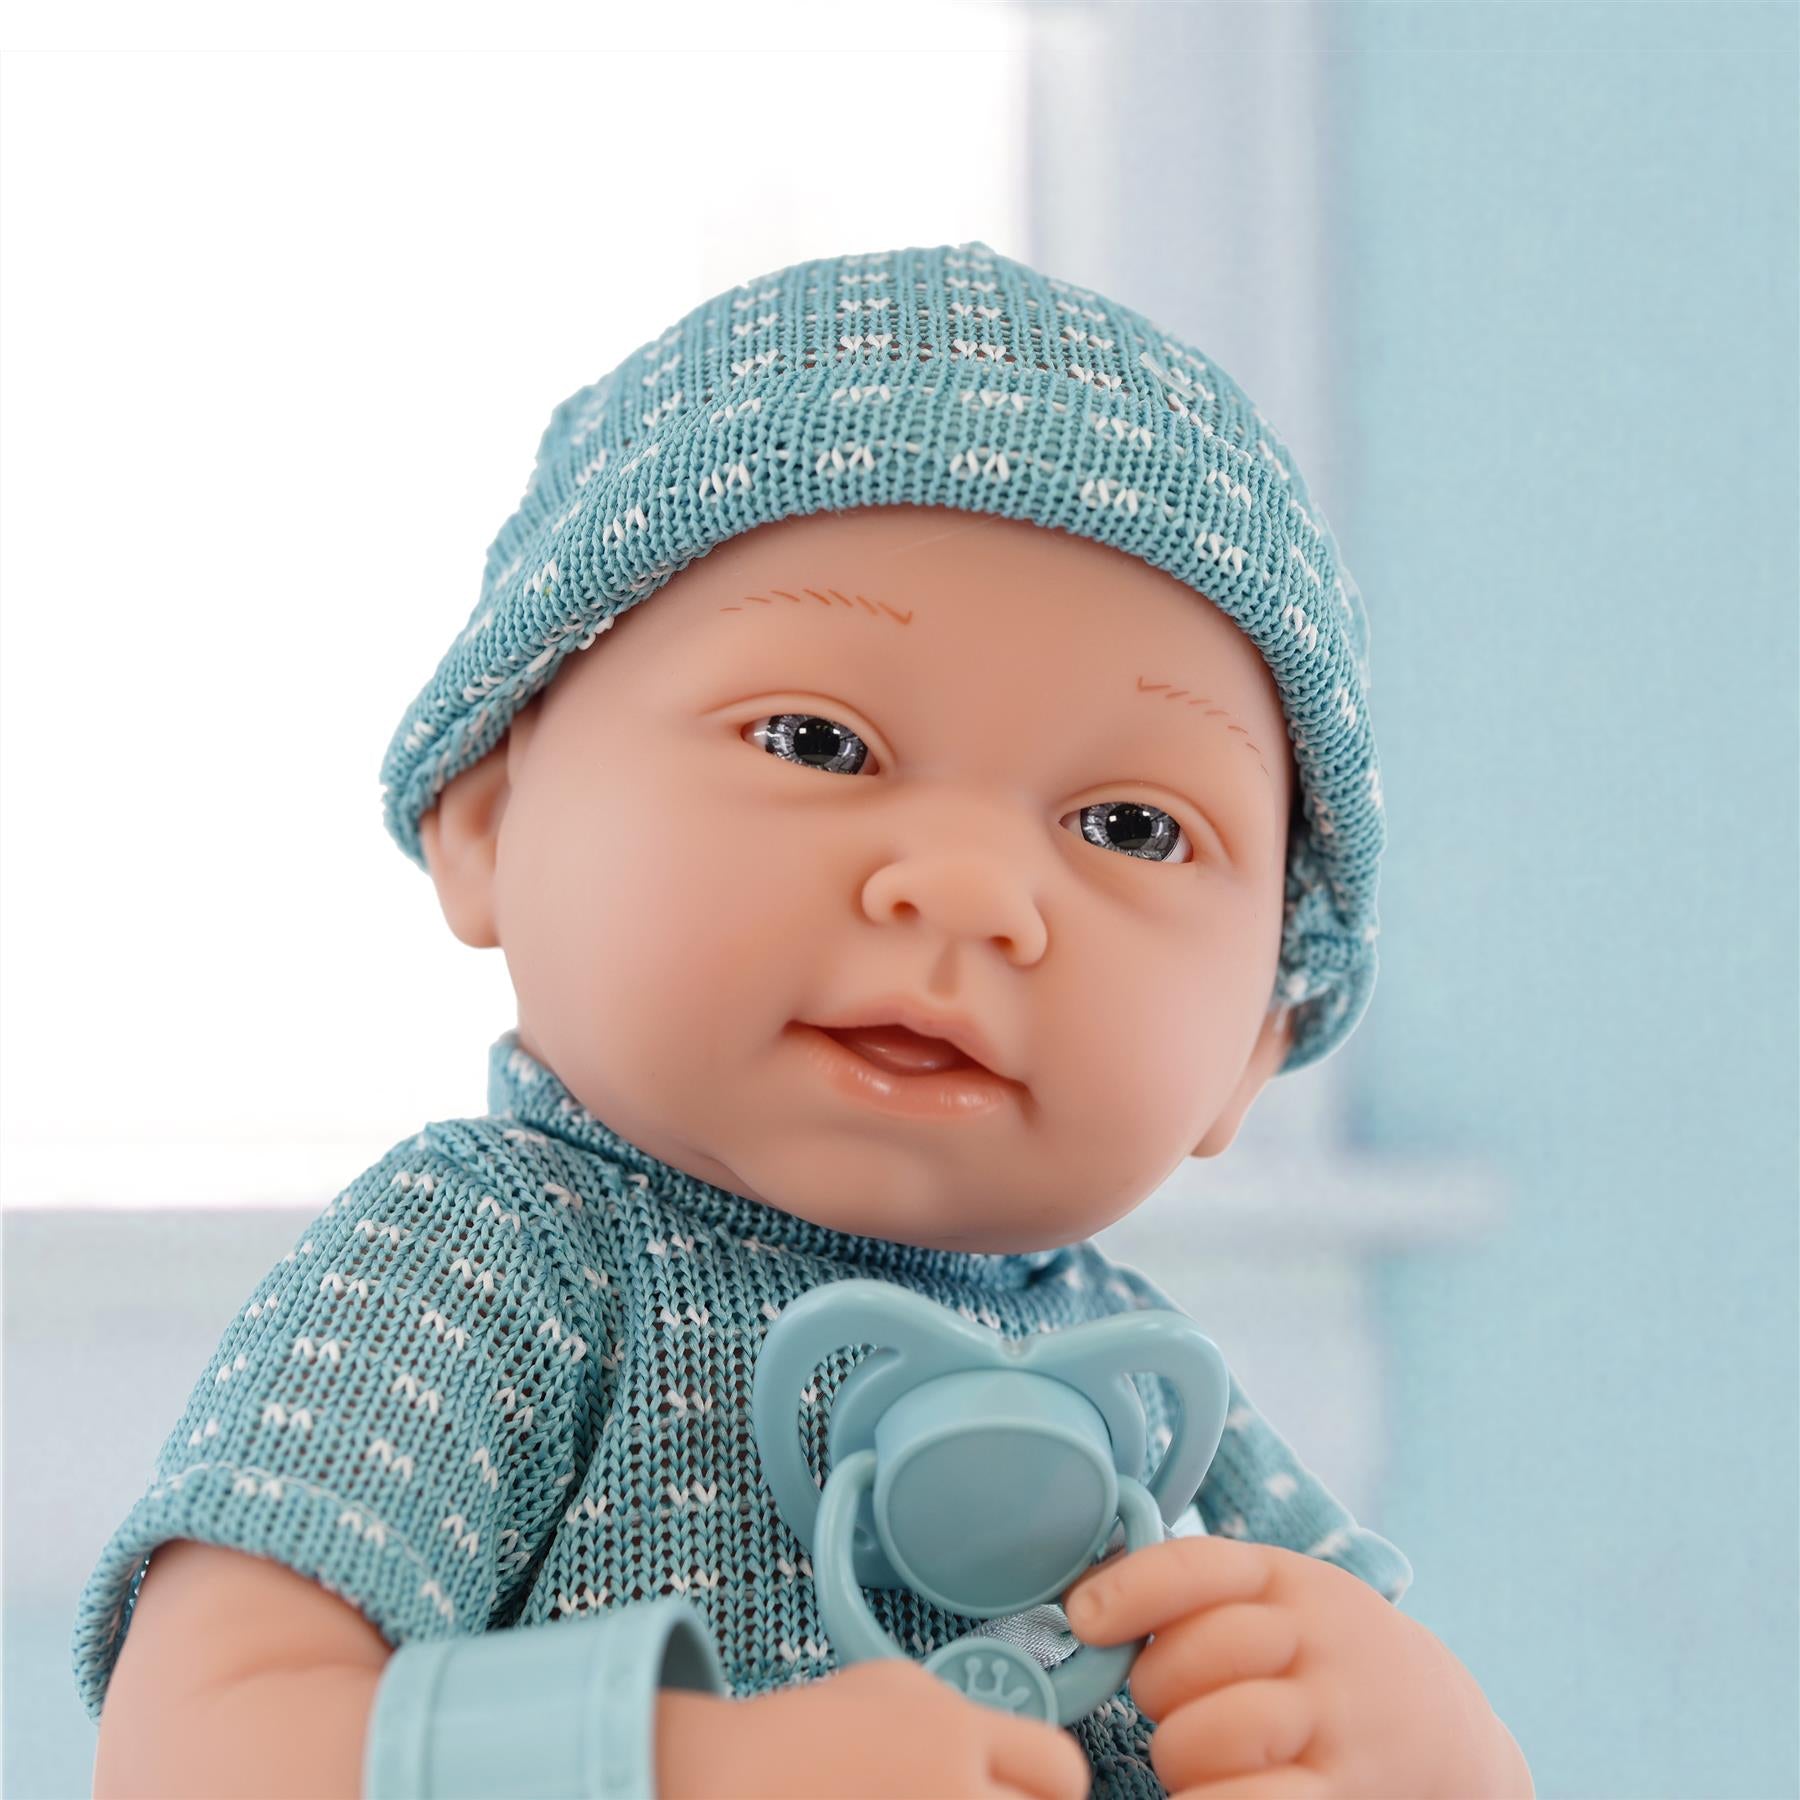 The Magic Toy Shop Baby Doll with Accessories 14" Newborn Baby Boy Doll